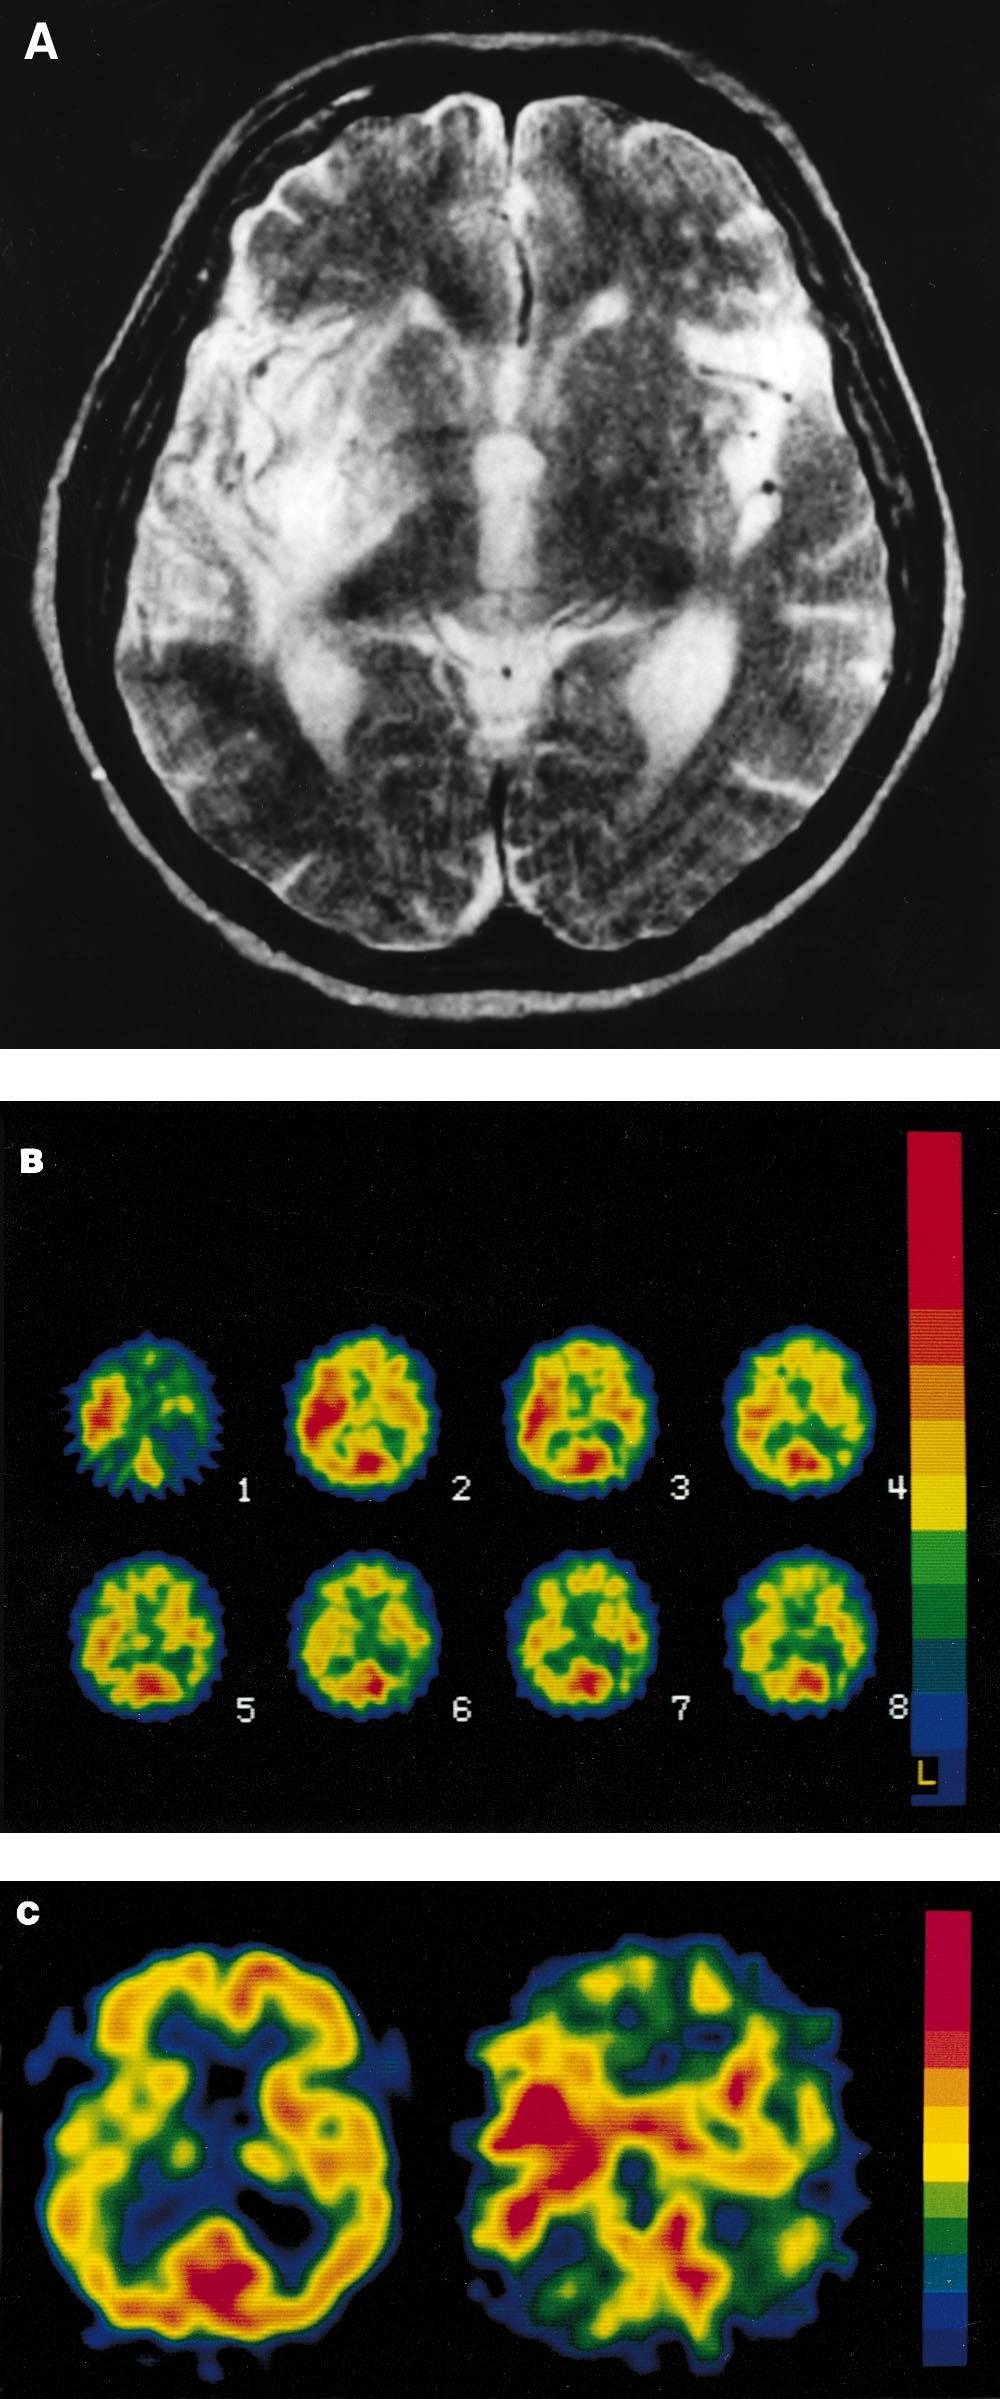 FIGURE 2. Patient 24. (A) T2-weighted MR image obtained 7 d after onset of initial symptoms reveals infarction in right MCA territory.